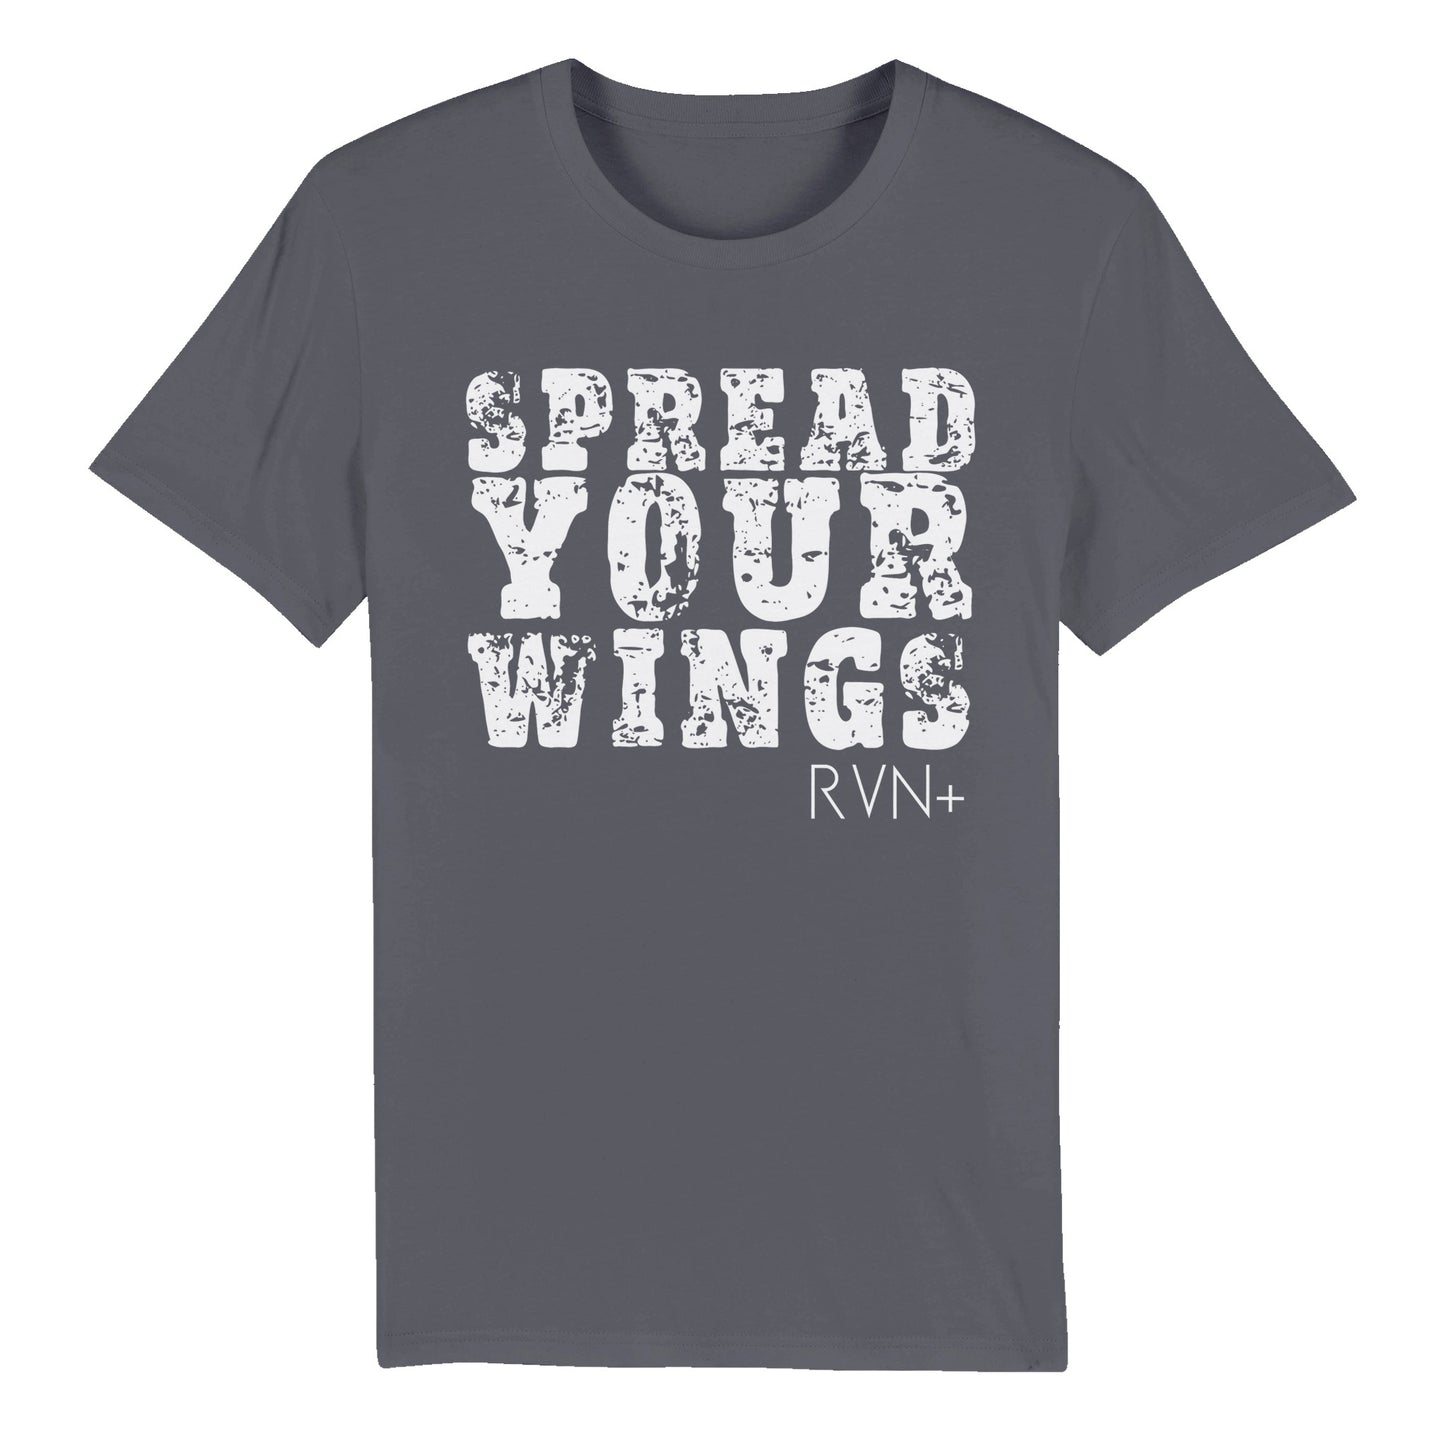 Spread Your Wings Organic Unisex Tee Clothes by Tobey Alexander